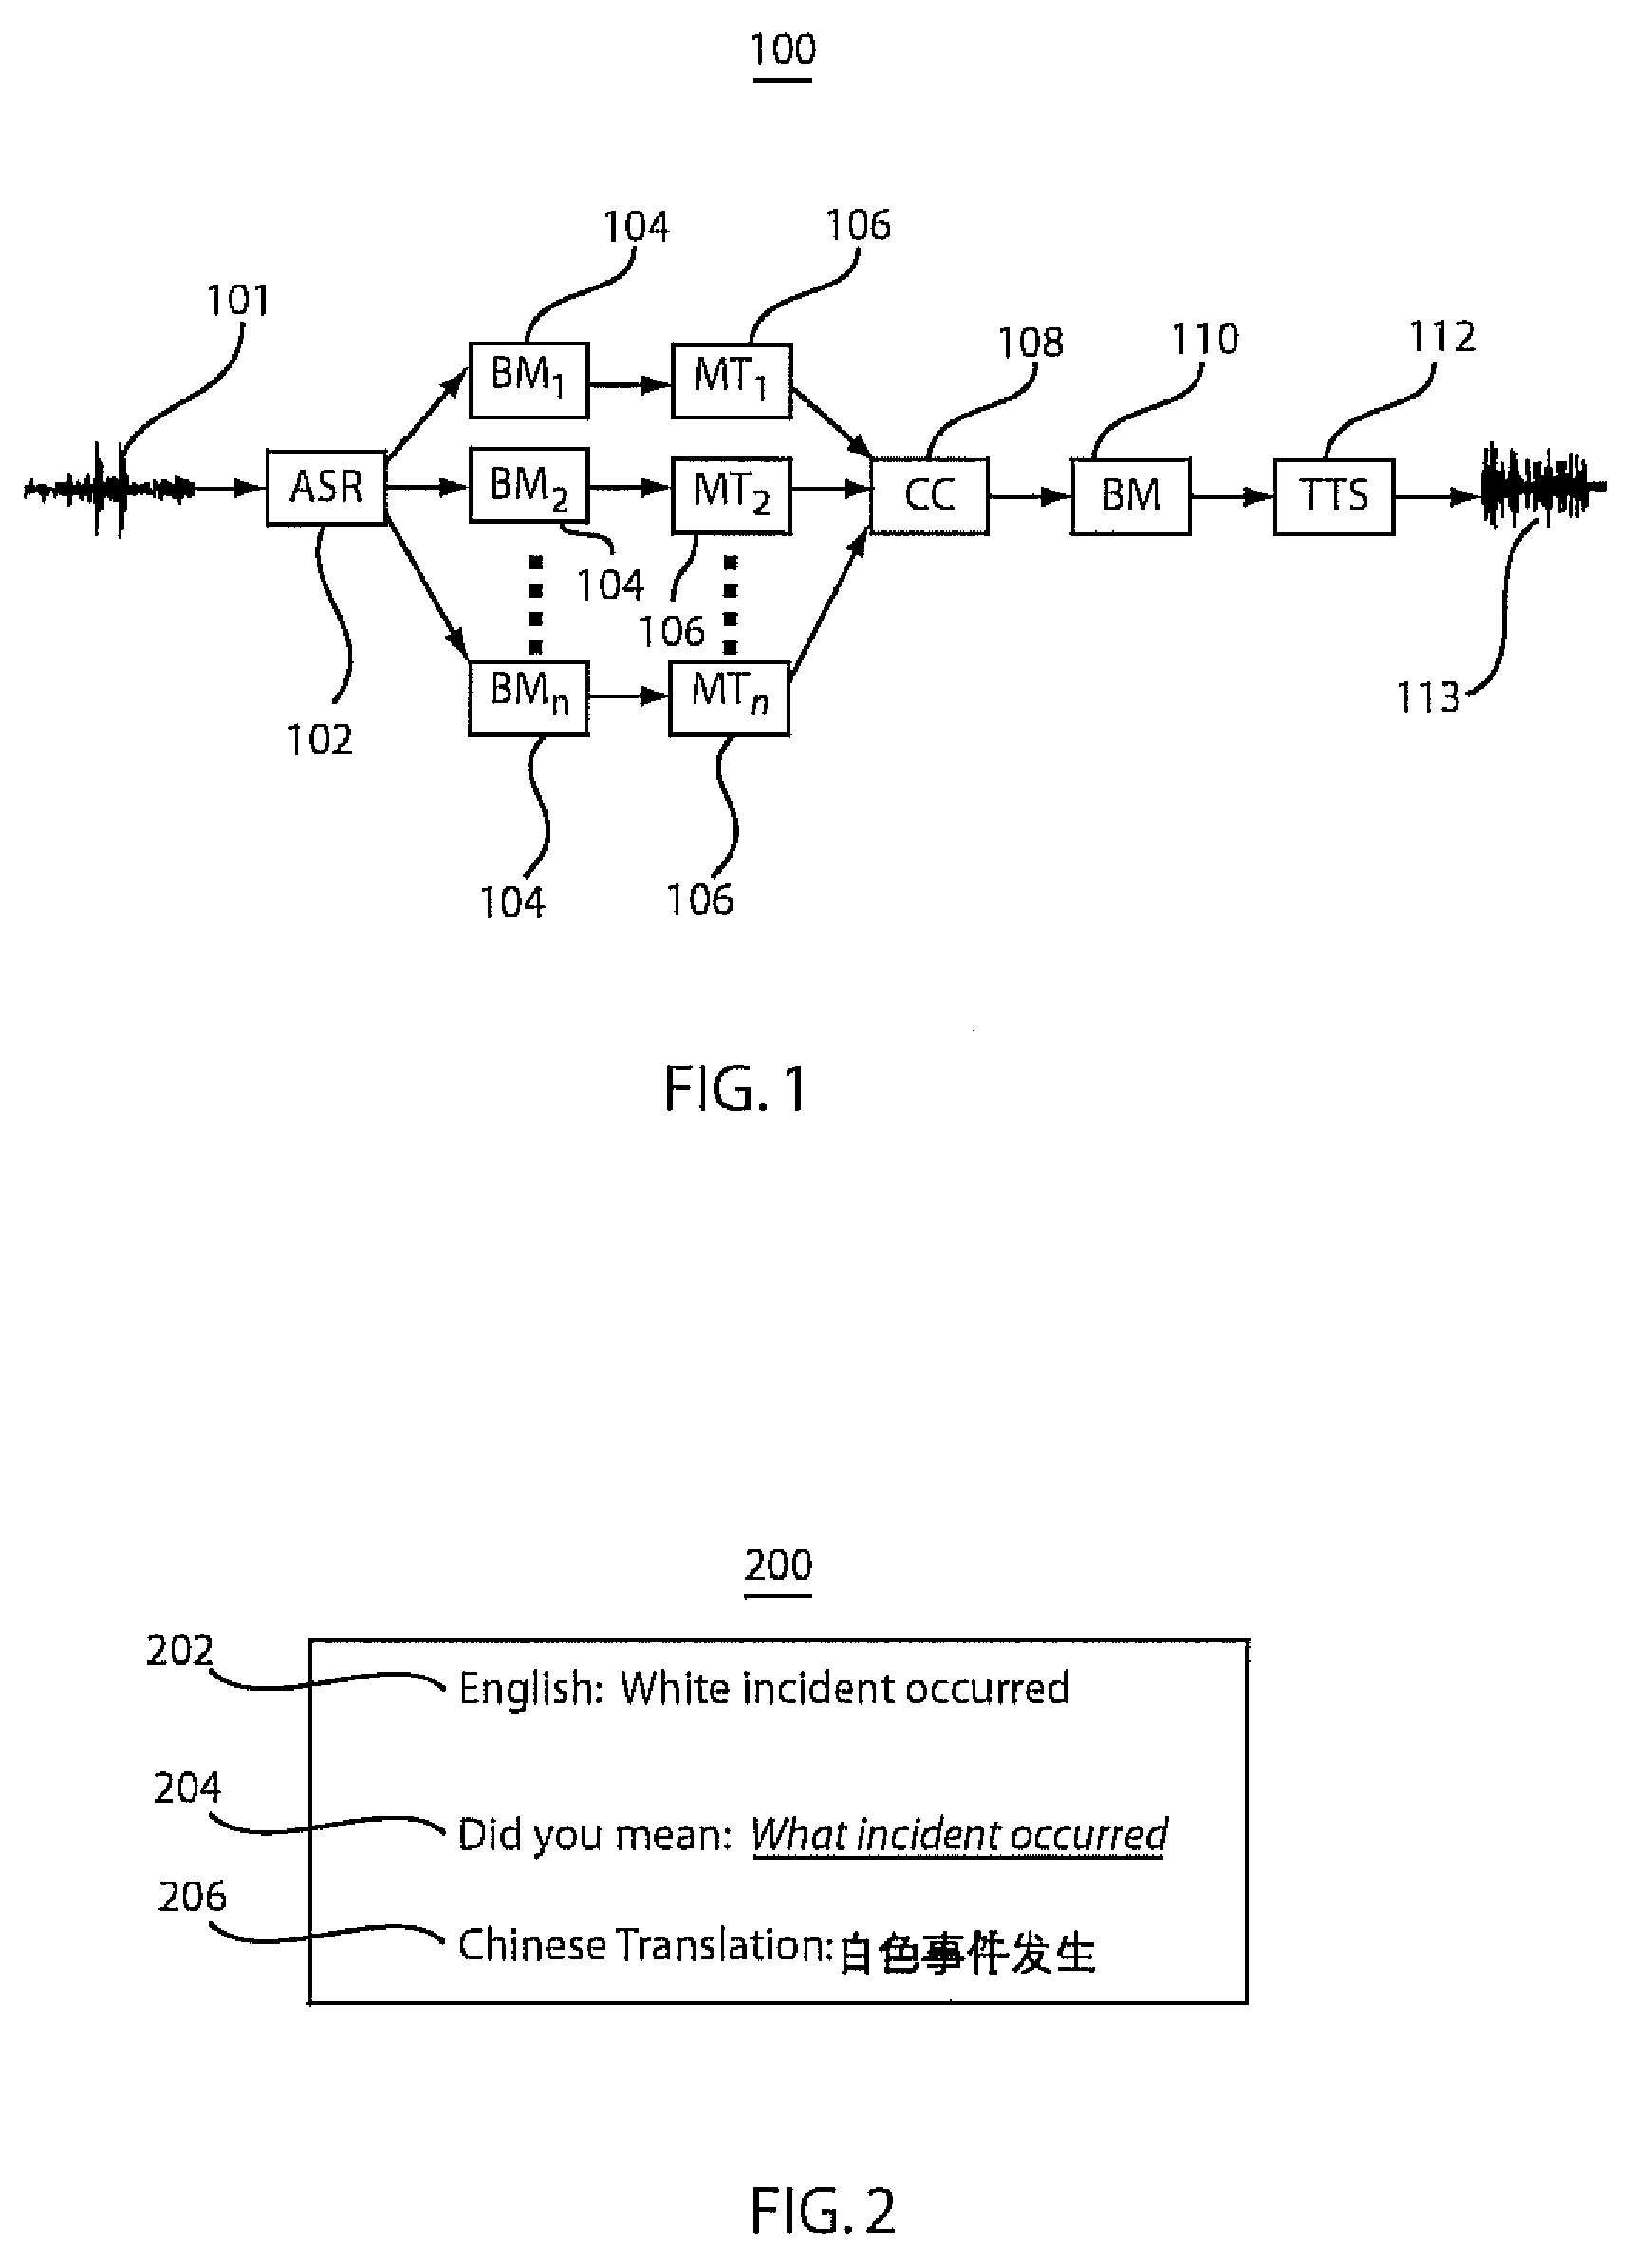 System and method for applying bridging models for robust and efficient speech to speech translation